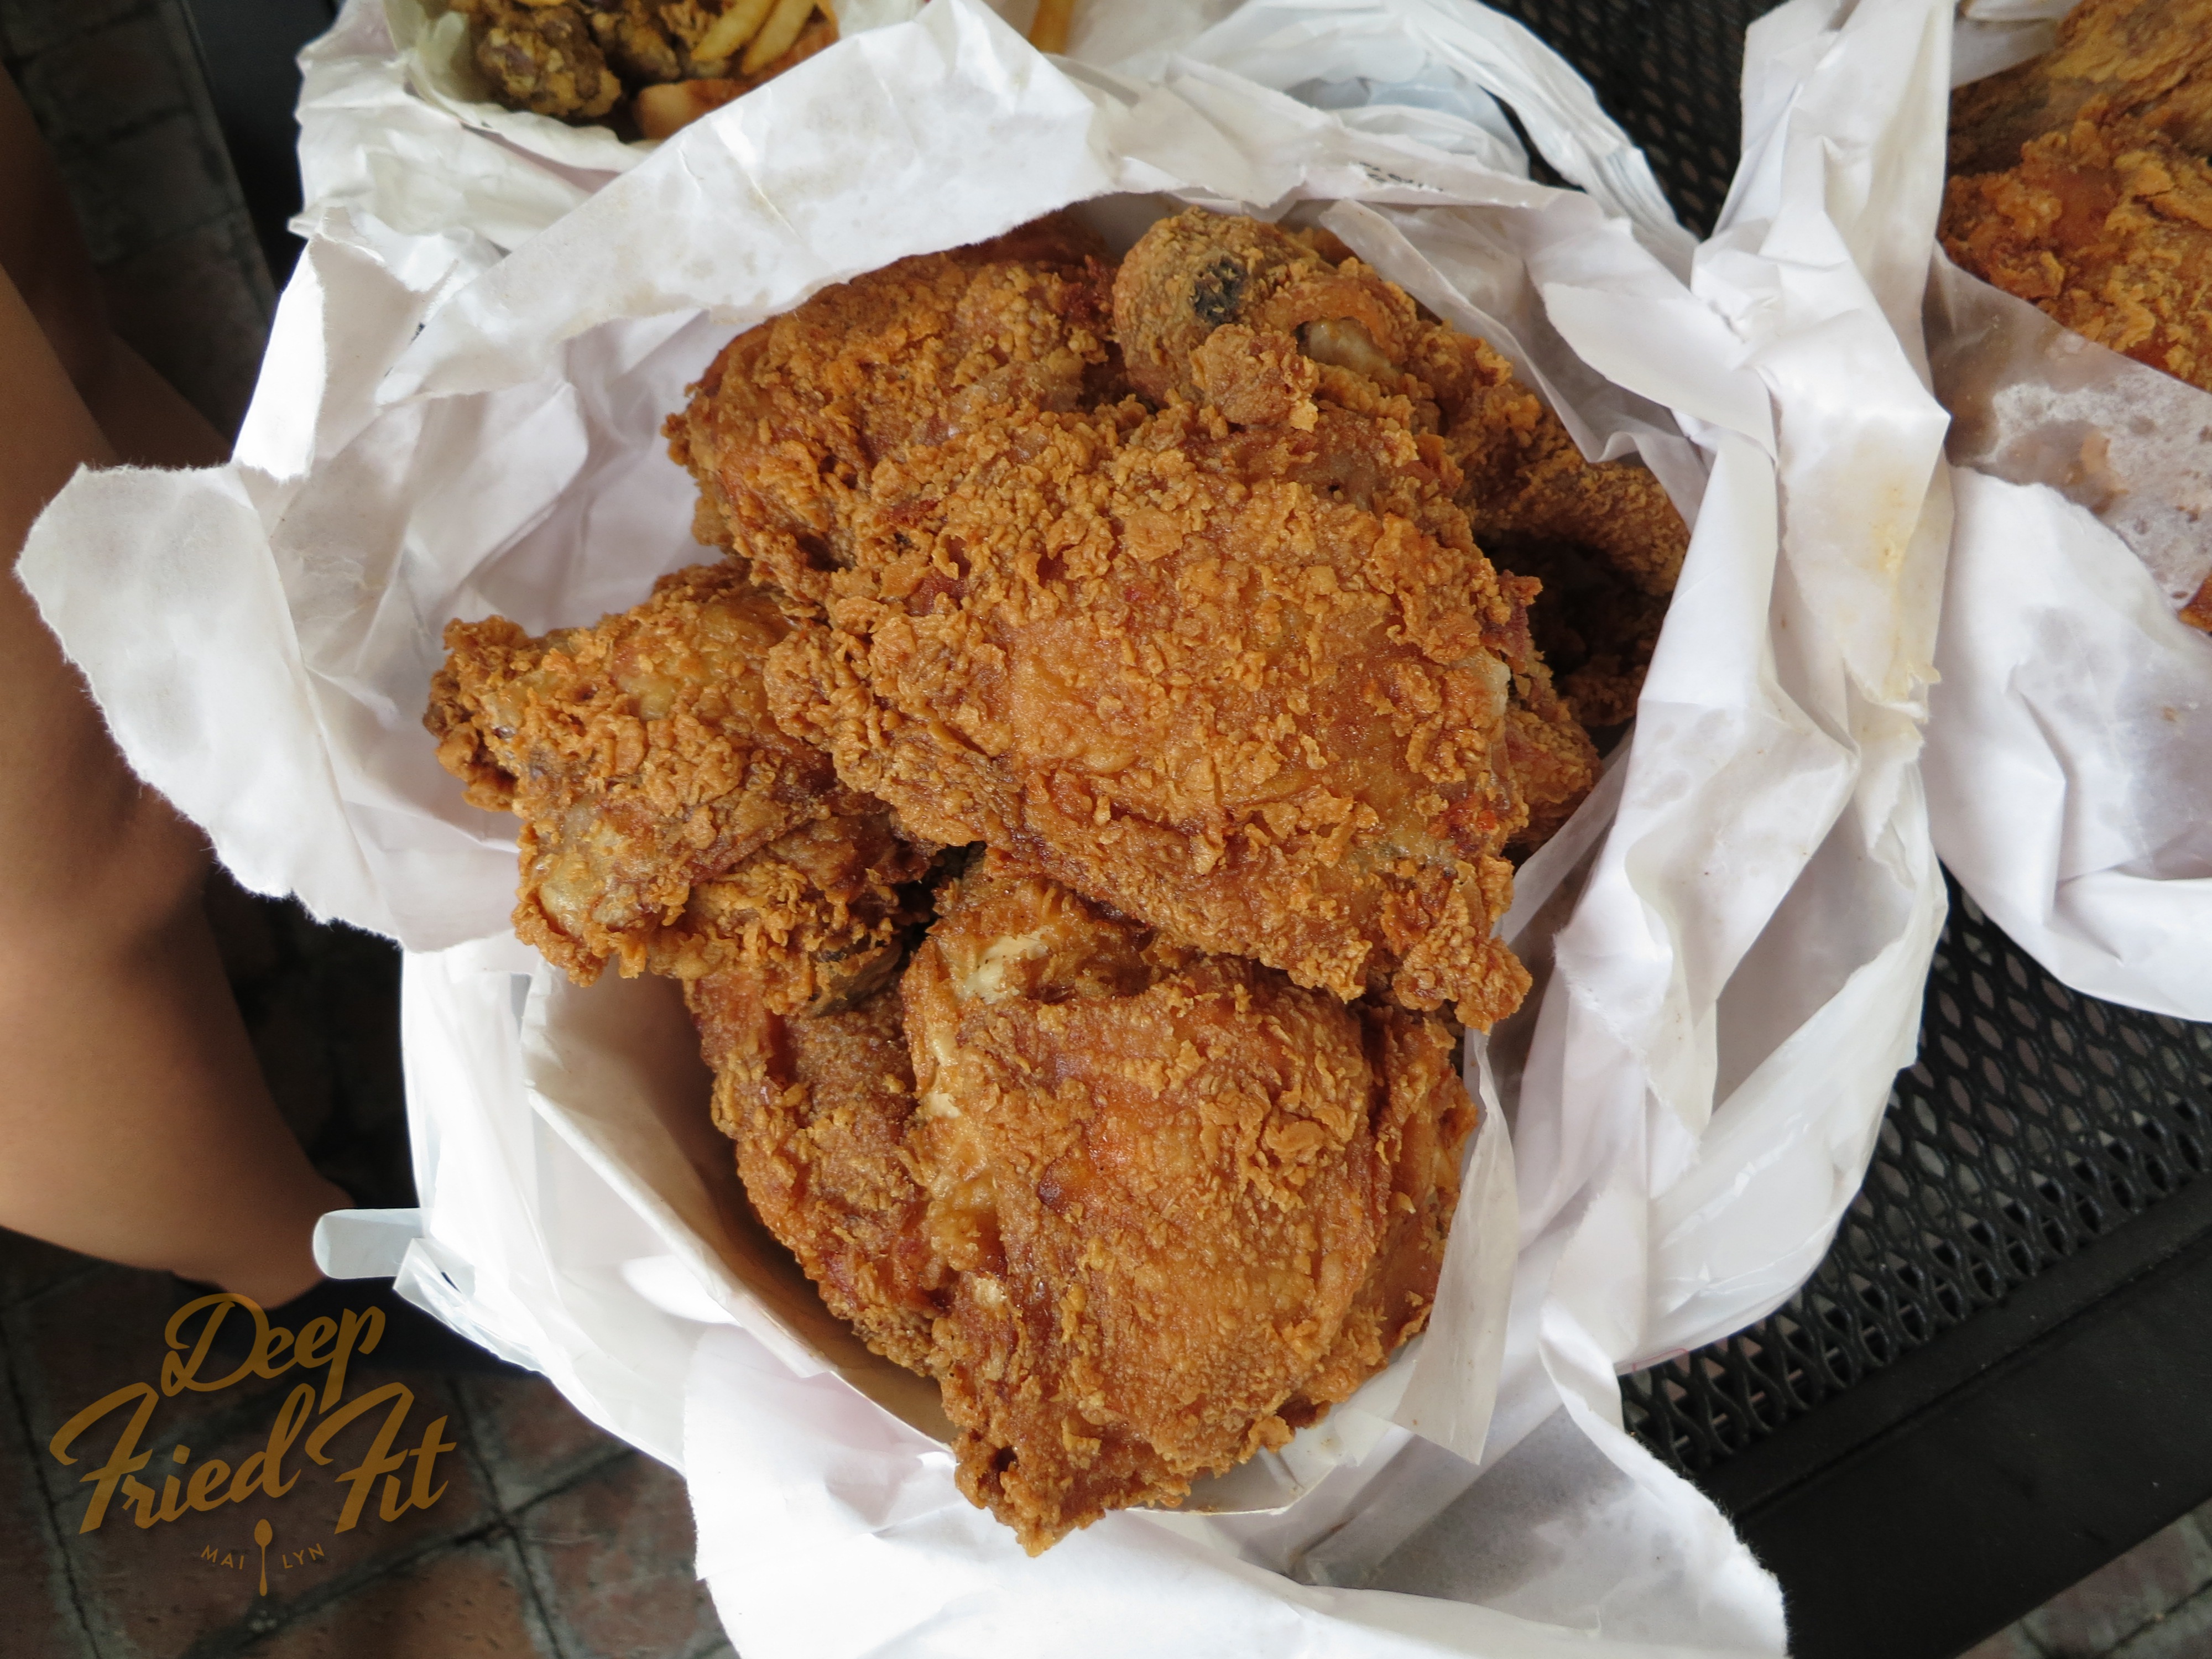 Rudy's Fried Chicken. Photo creed: Tim Lam